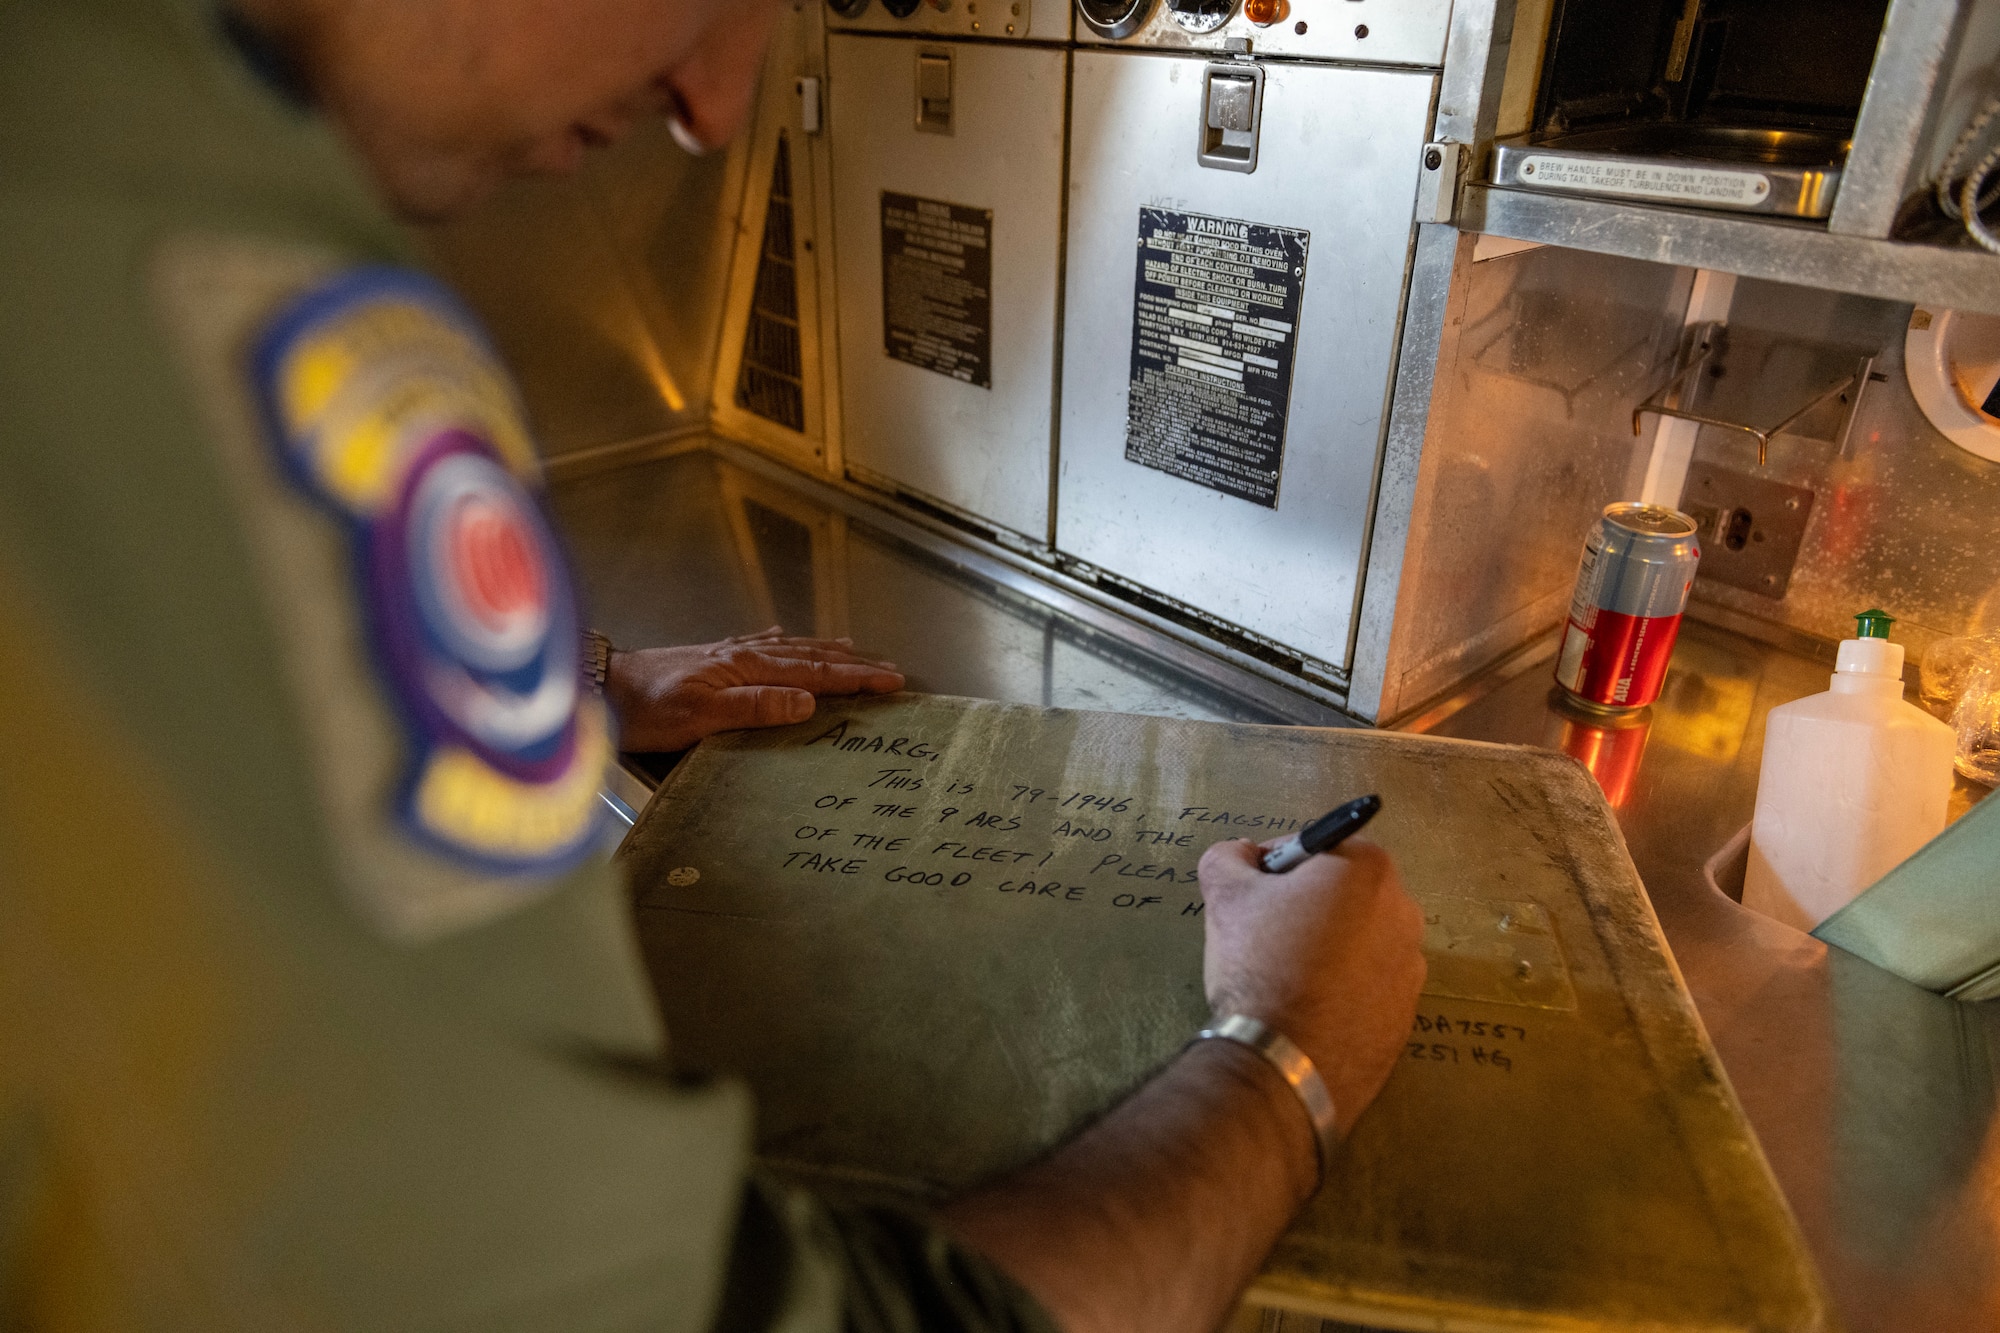 U.S. Air Force Lt. Col. Andrew Baer, 9th Air Refueling Squadron commander and KC-10 Extender pilot, leaves a note for the 309th Aerospace Maintenance and Regeneration Group (AMARG).